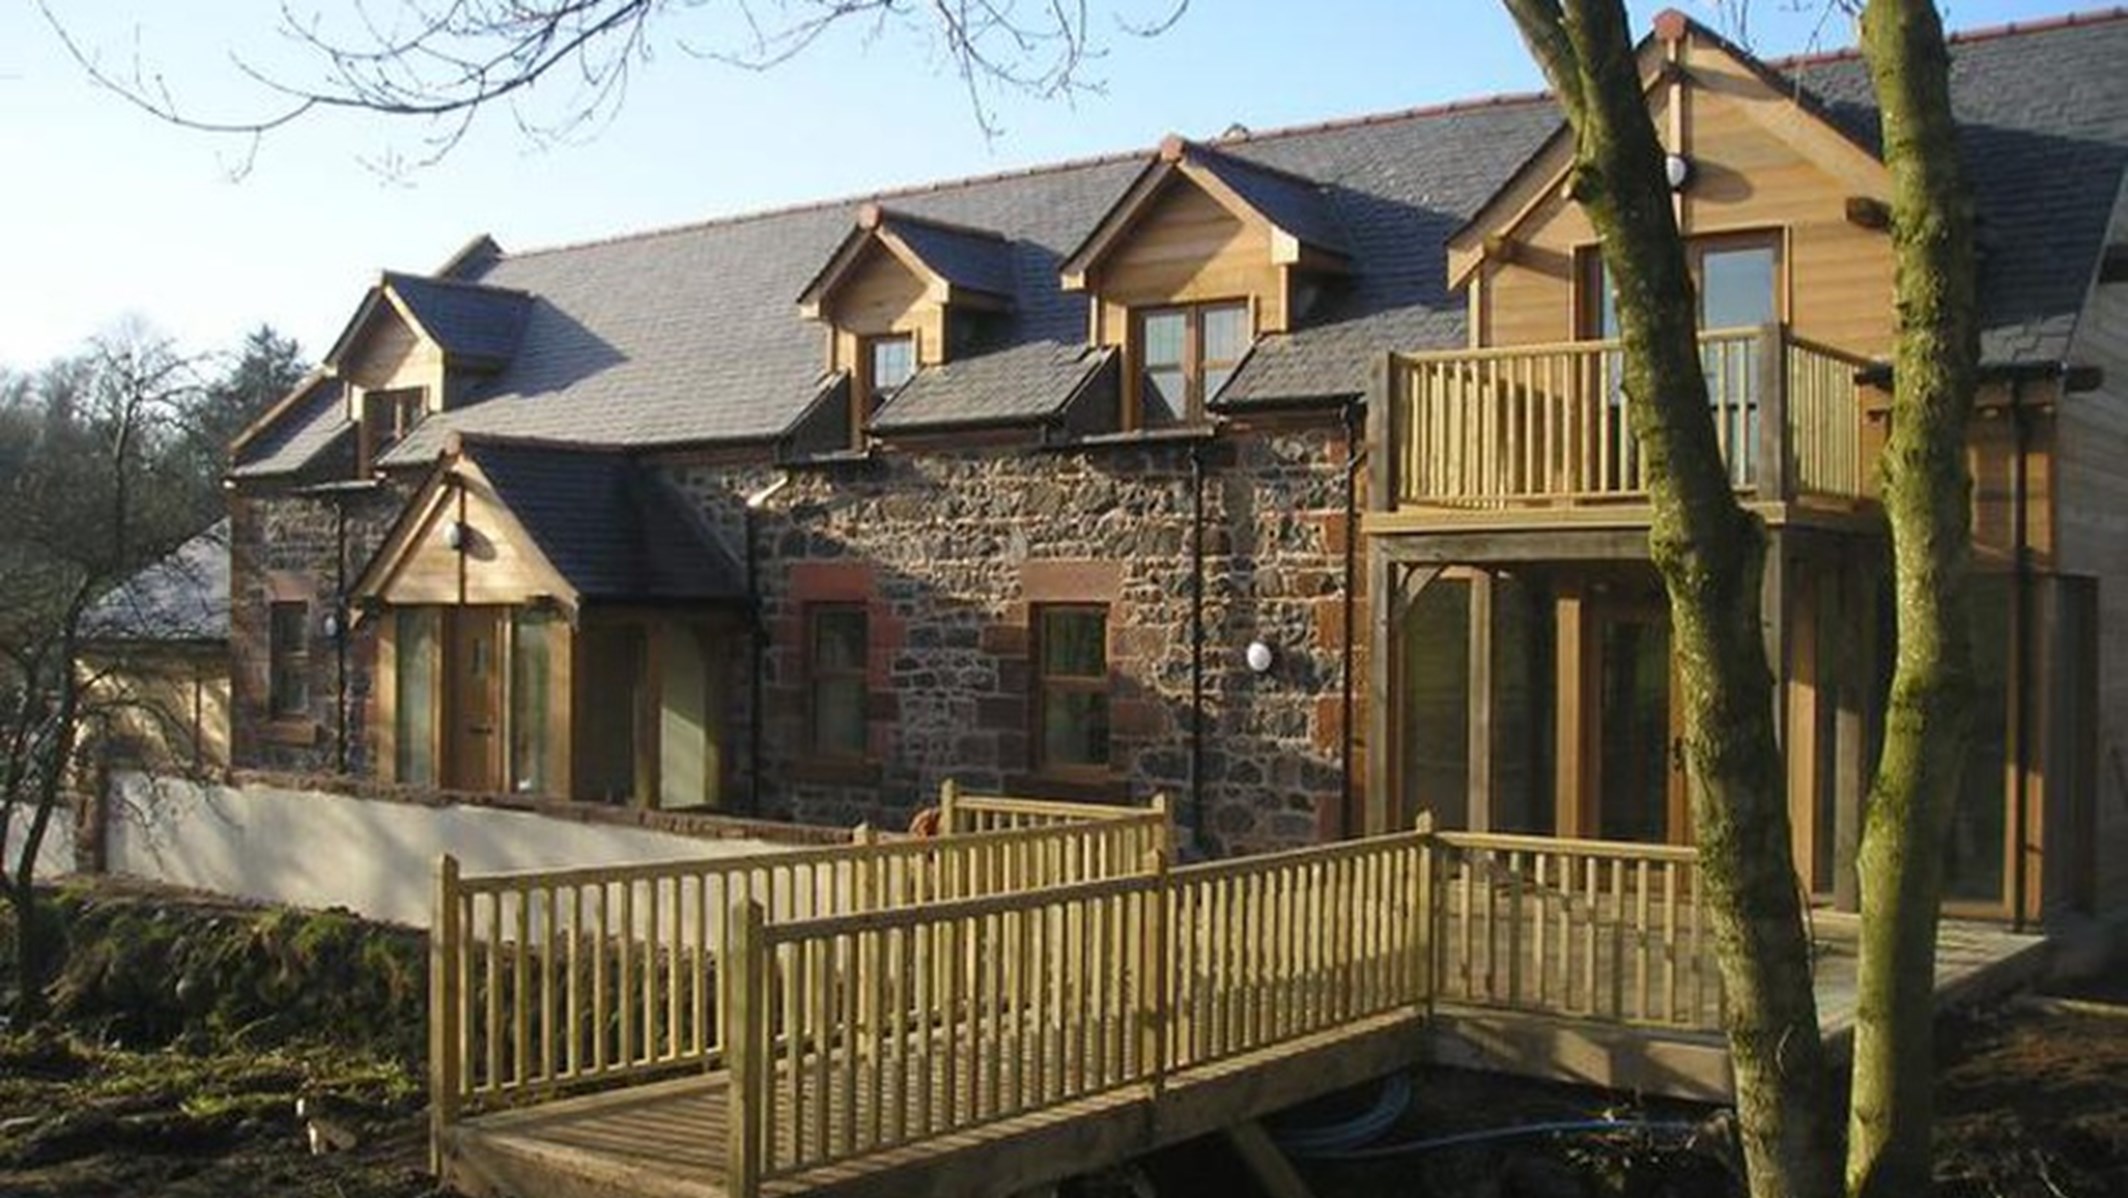 An Exterior Image of Purclewan Mill